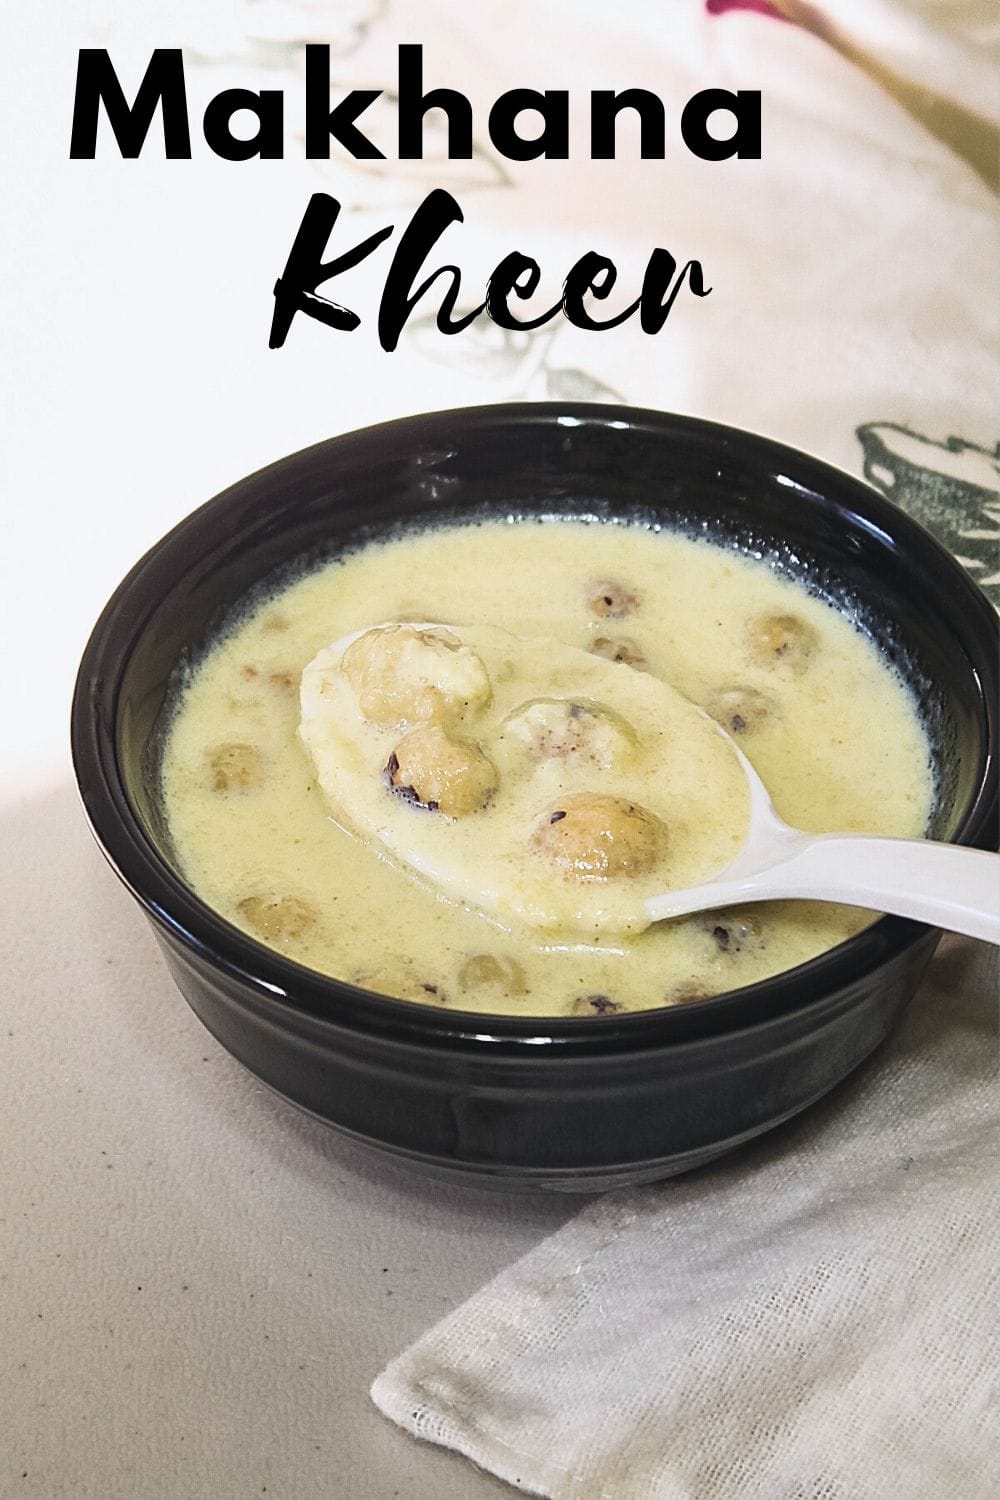 makhana kheer in a bowl with text on top of the image for pinterest